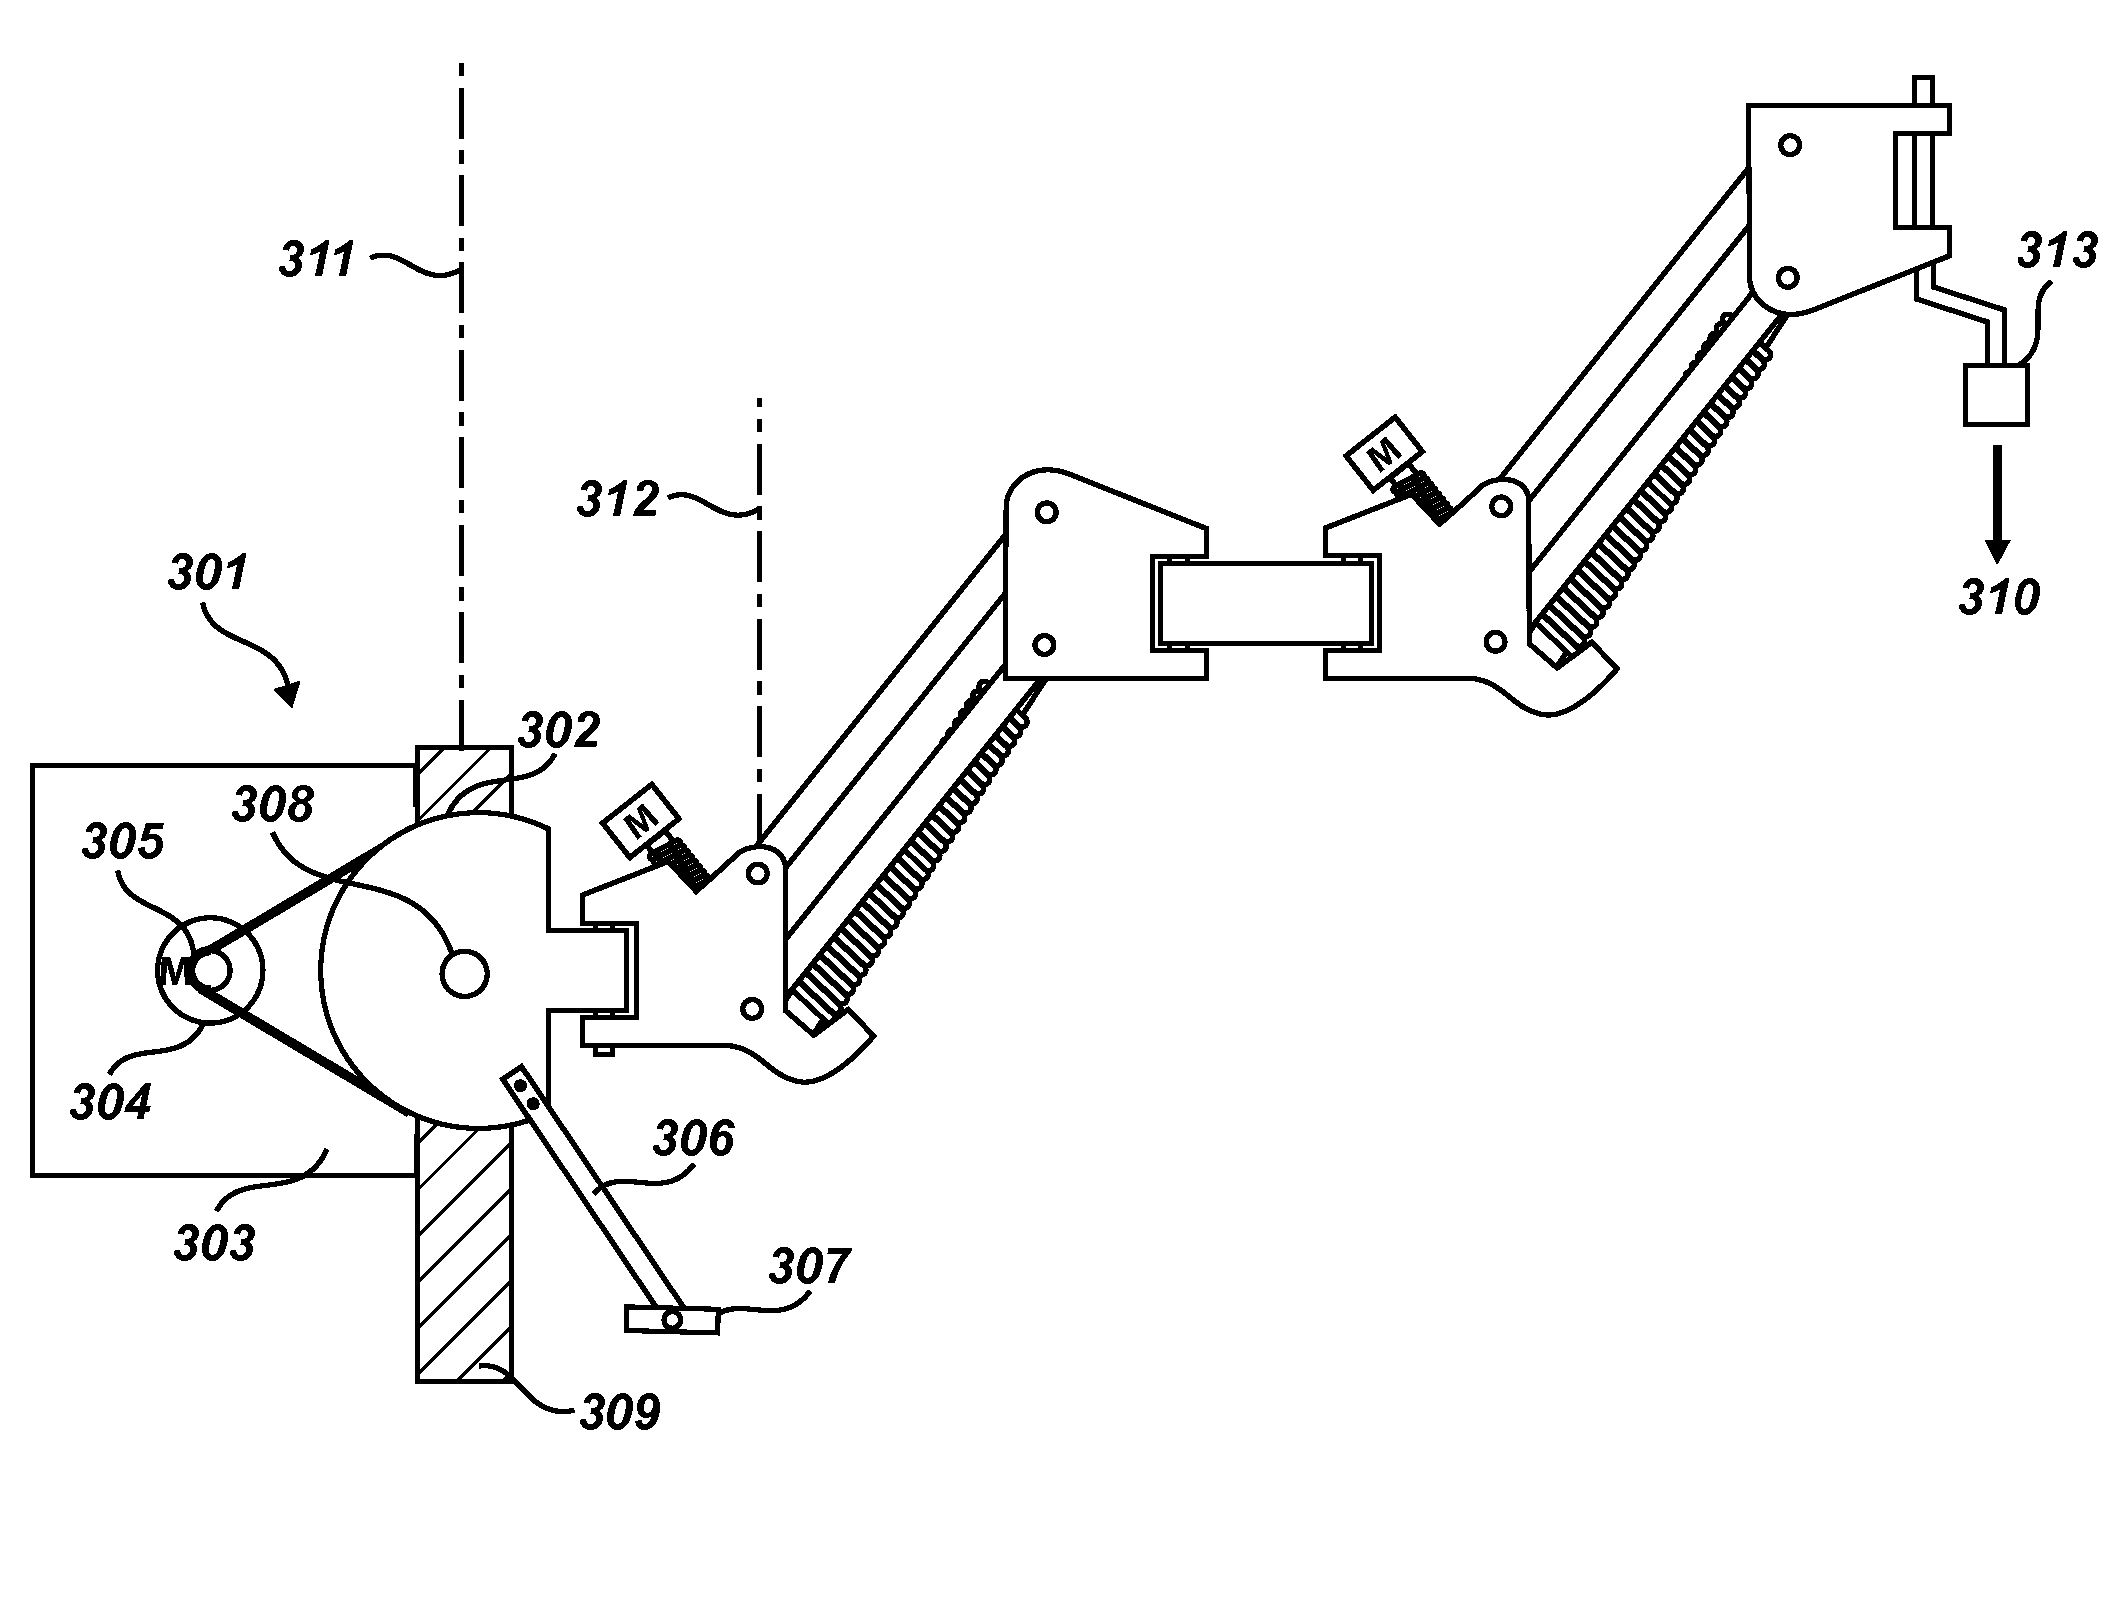 Apparatus for hand control, pressure amplification, and stabilization of medical and industrial devices